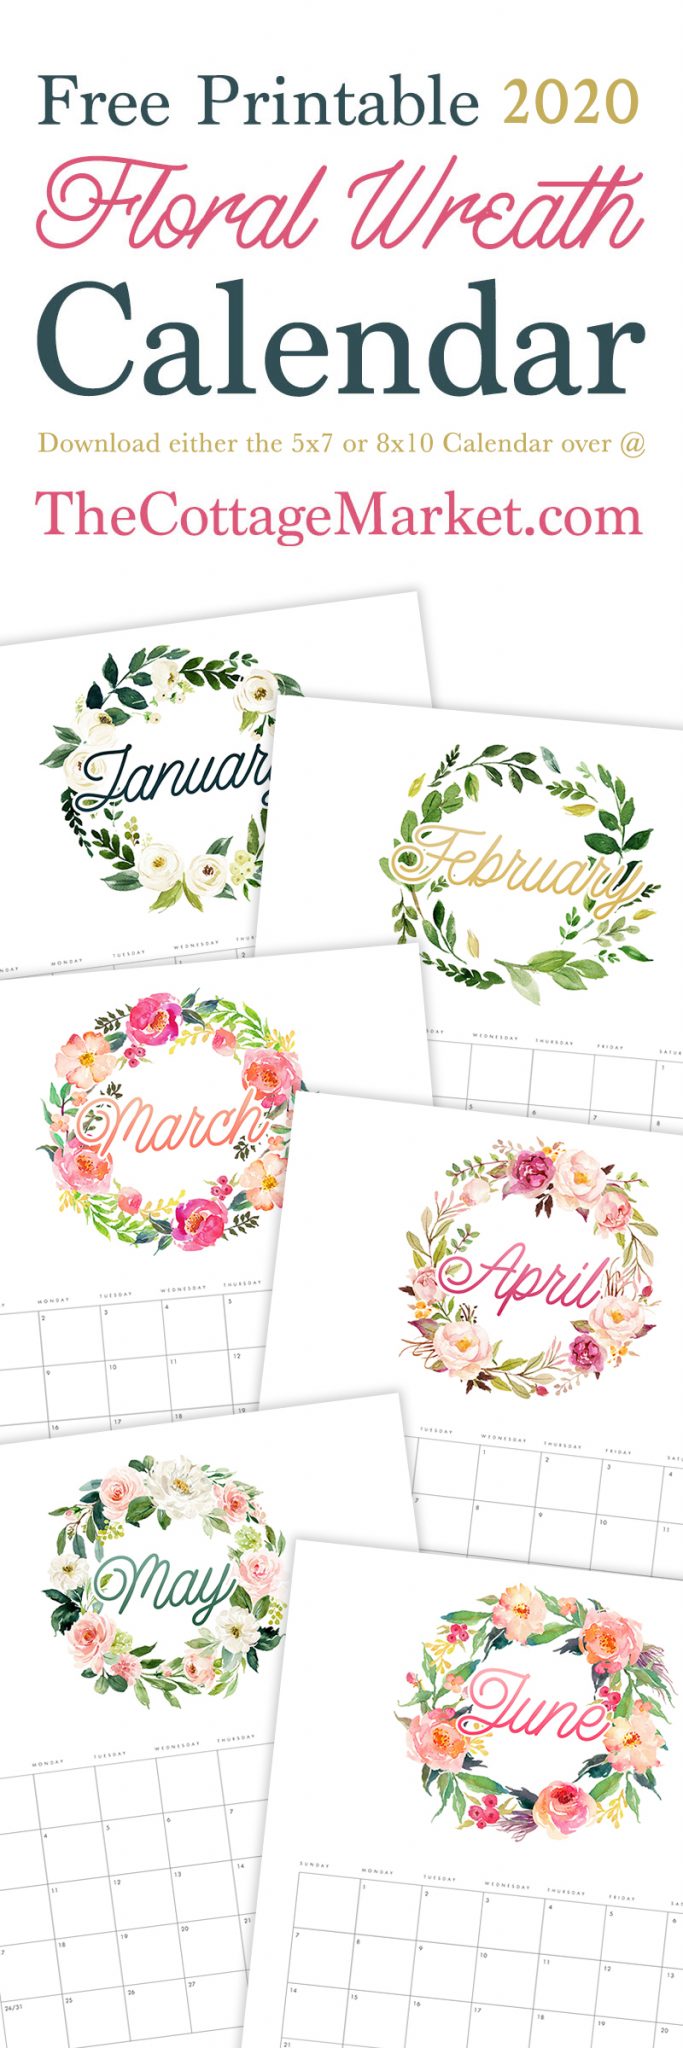 This Gorgeous Free Printable 2020 Floral Wreath Calendar is going to look amazing on your wall, bulletin board, desk or even in your planner!  It will keep you organized all year long!